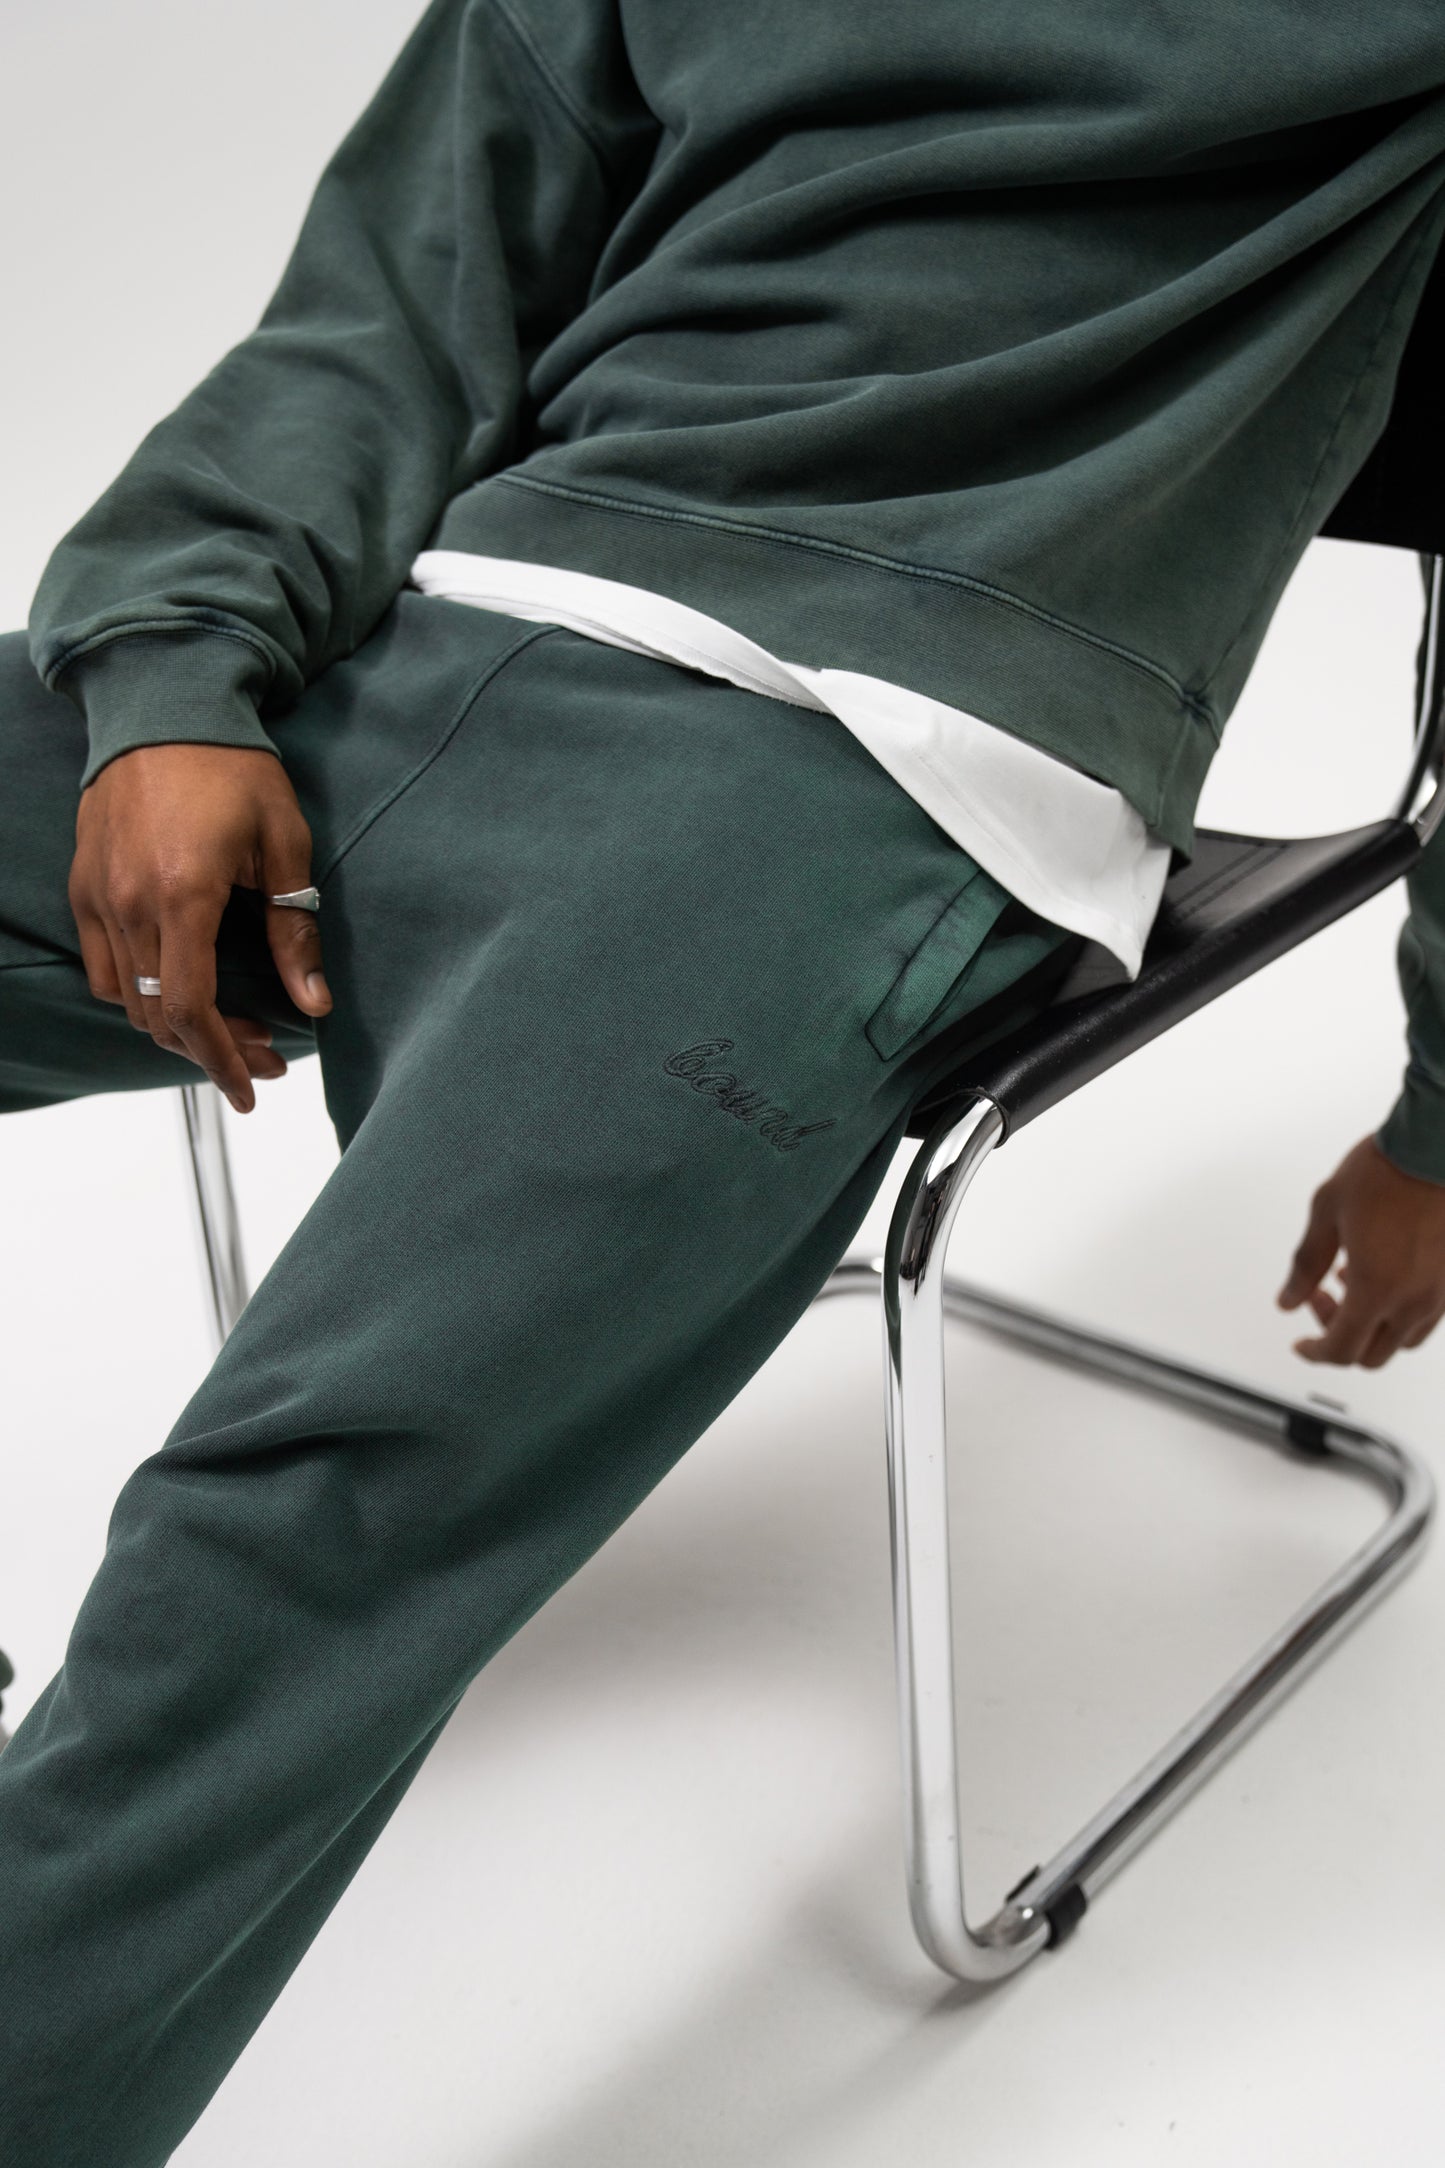 SUSTAIN WASHED GREEN JOGGERS